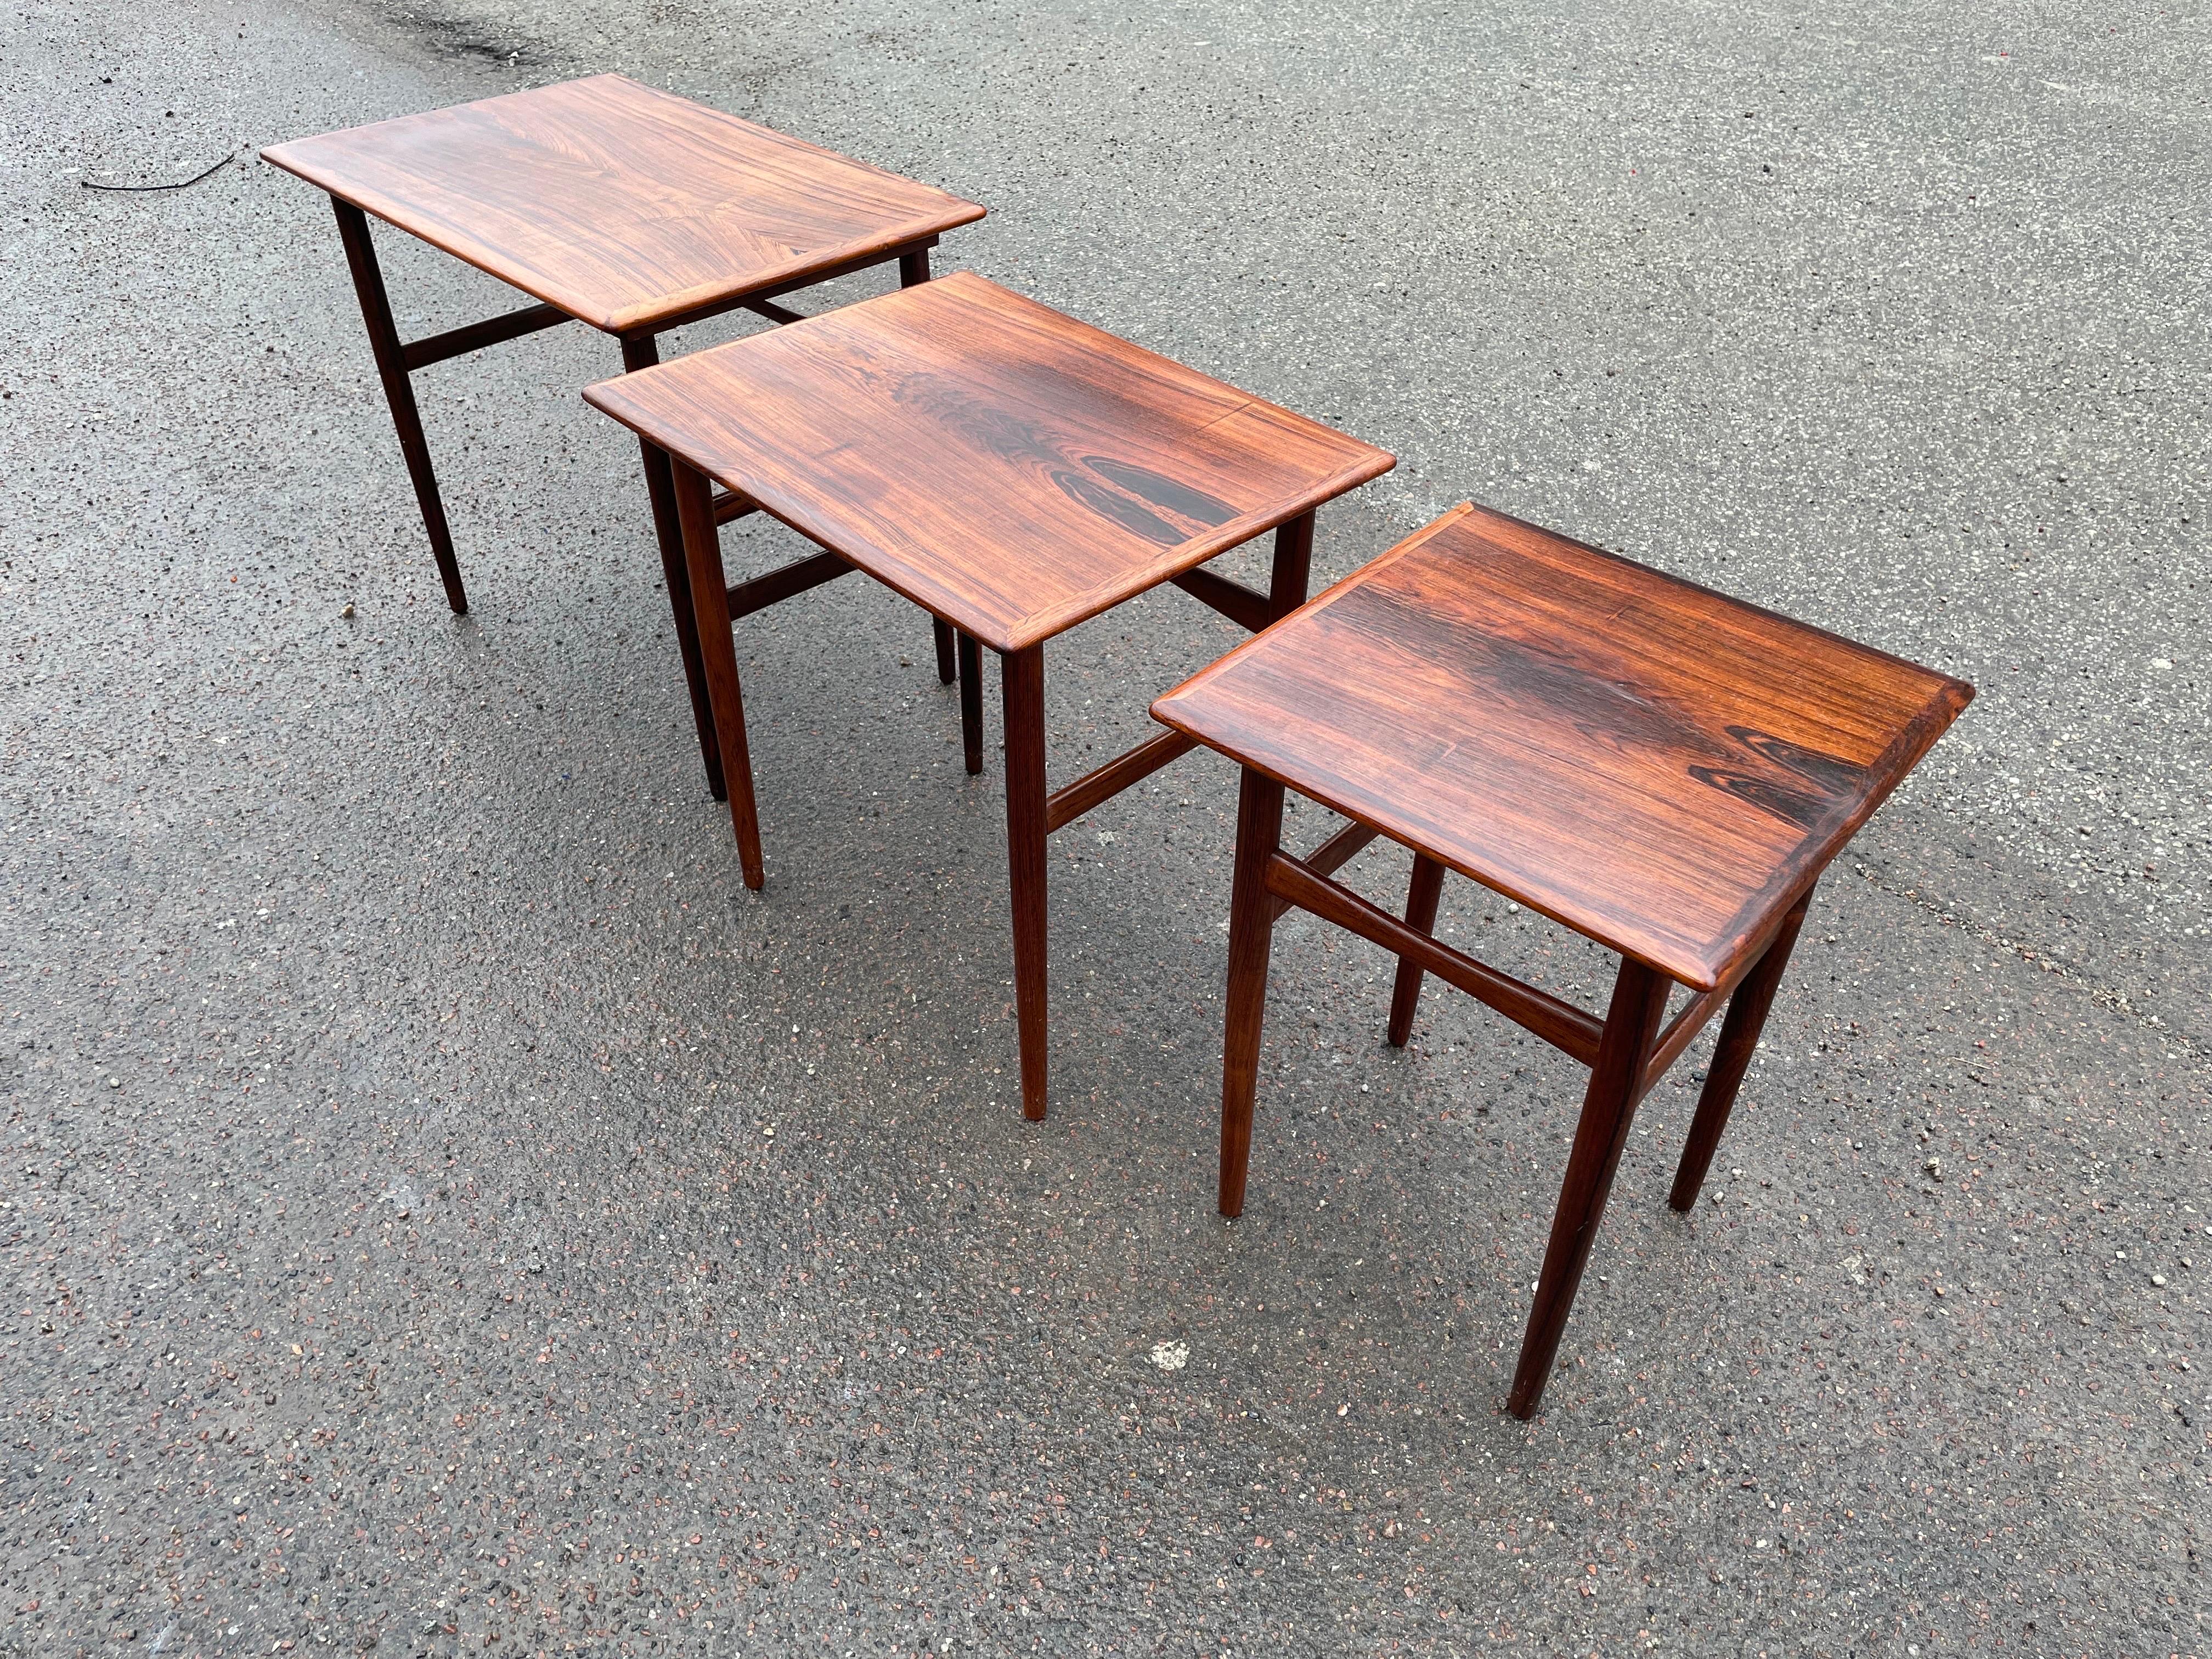 Mid-20th Century Danish Mid-Century Modern Rosewood Nesting Tables from the 1960’s